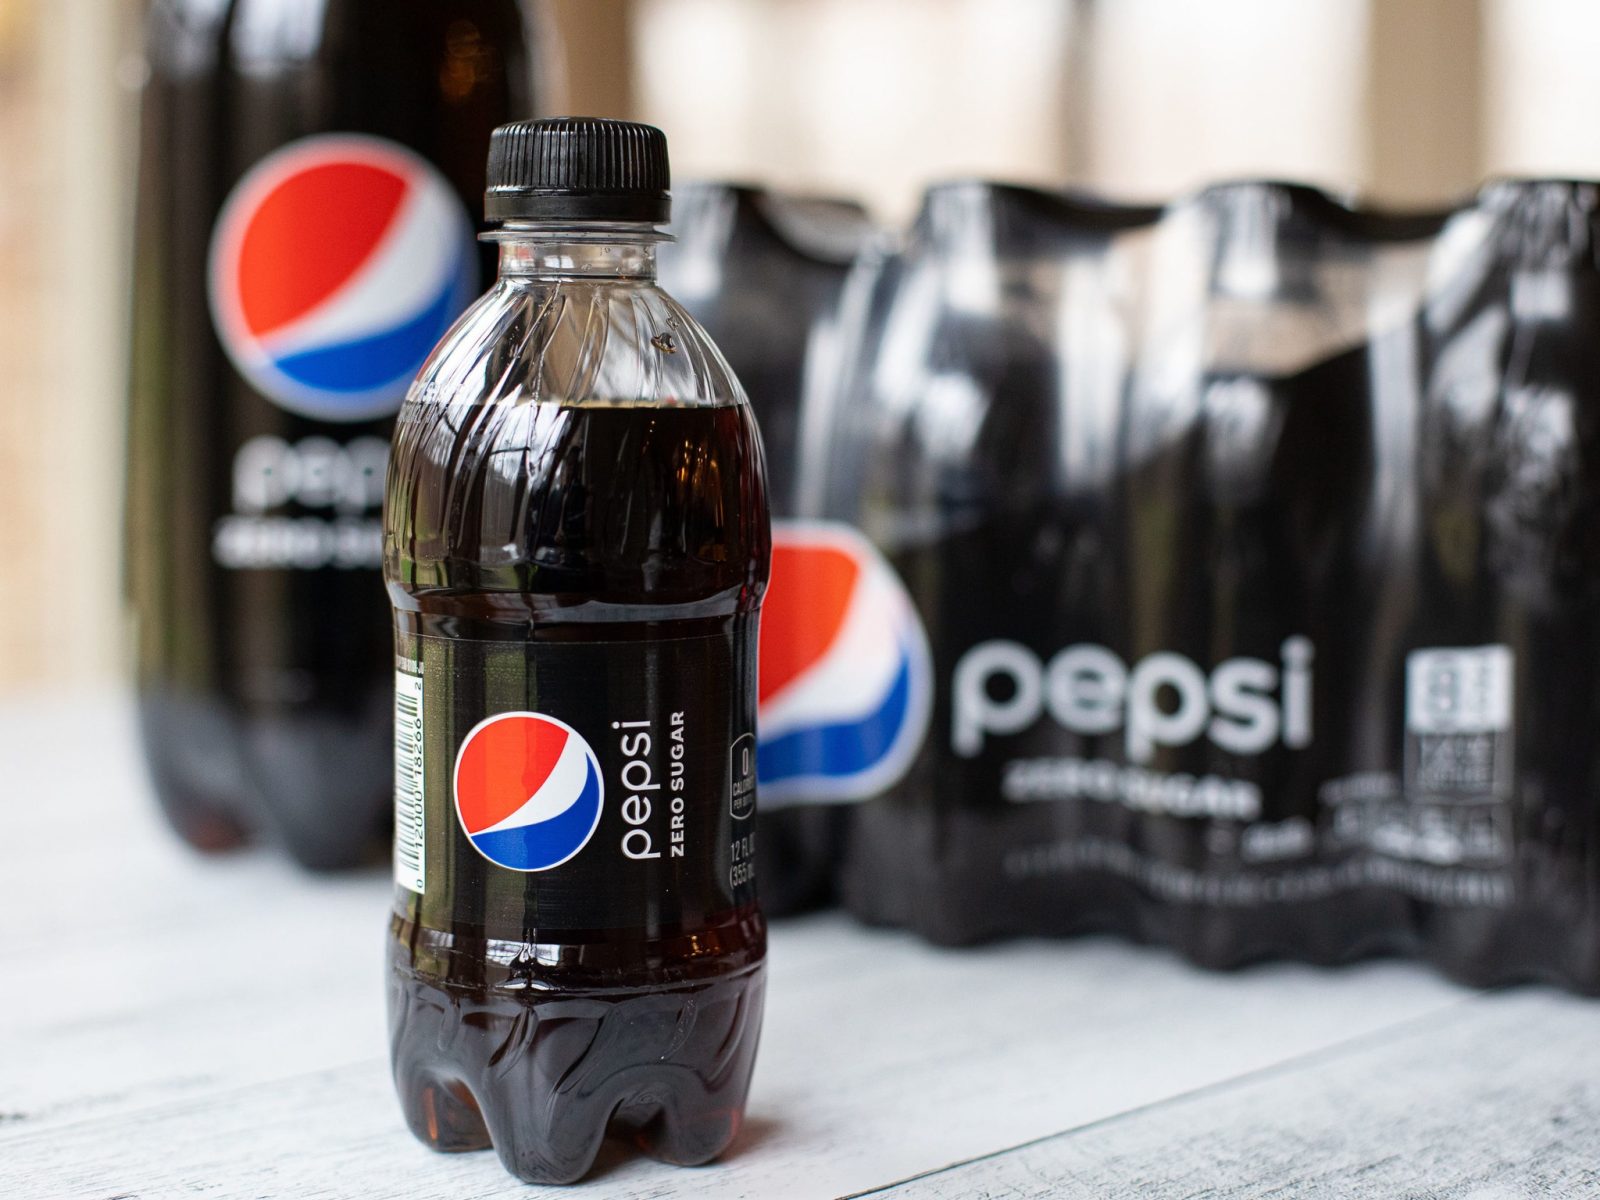 Pepsi 8-Pack Bottles or 12 Or 15-Pack Cans As Low As $2.87 At Kroger